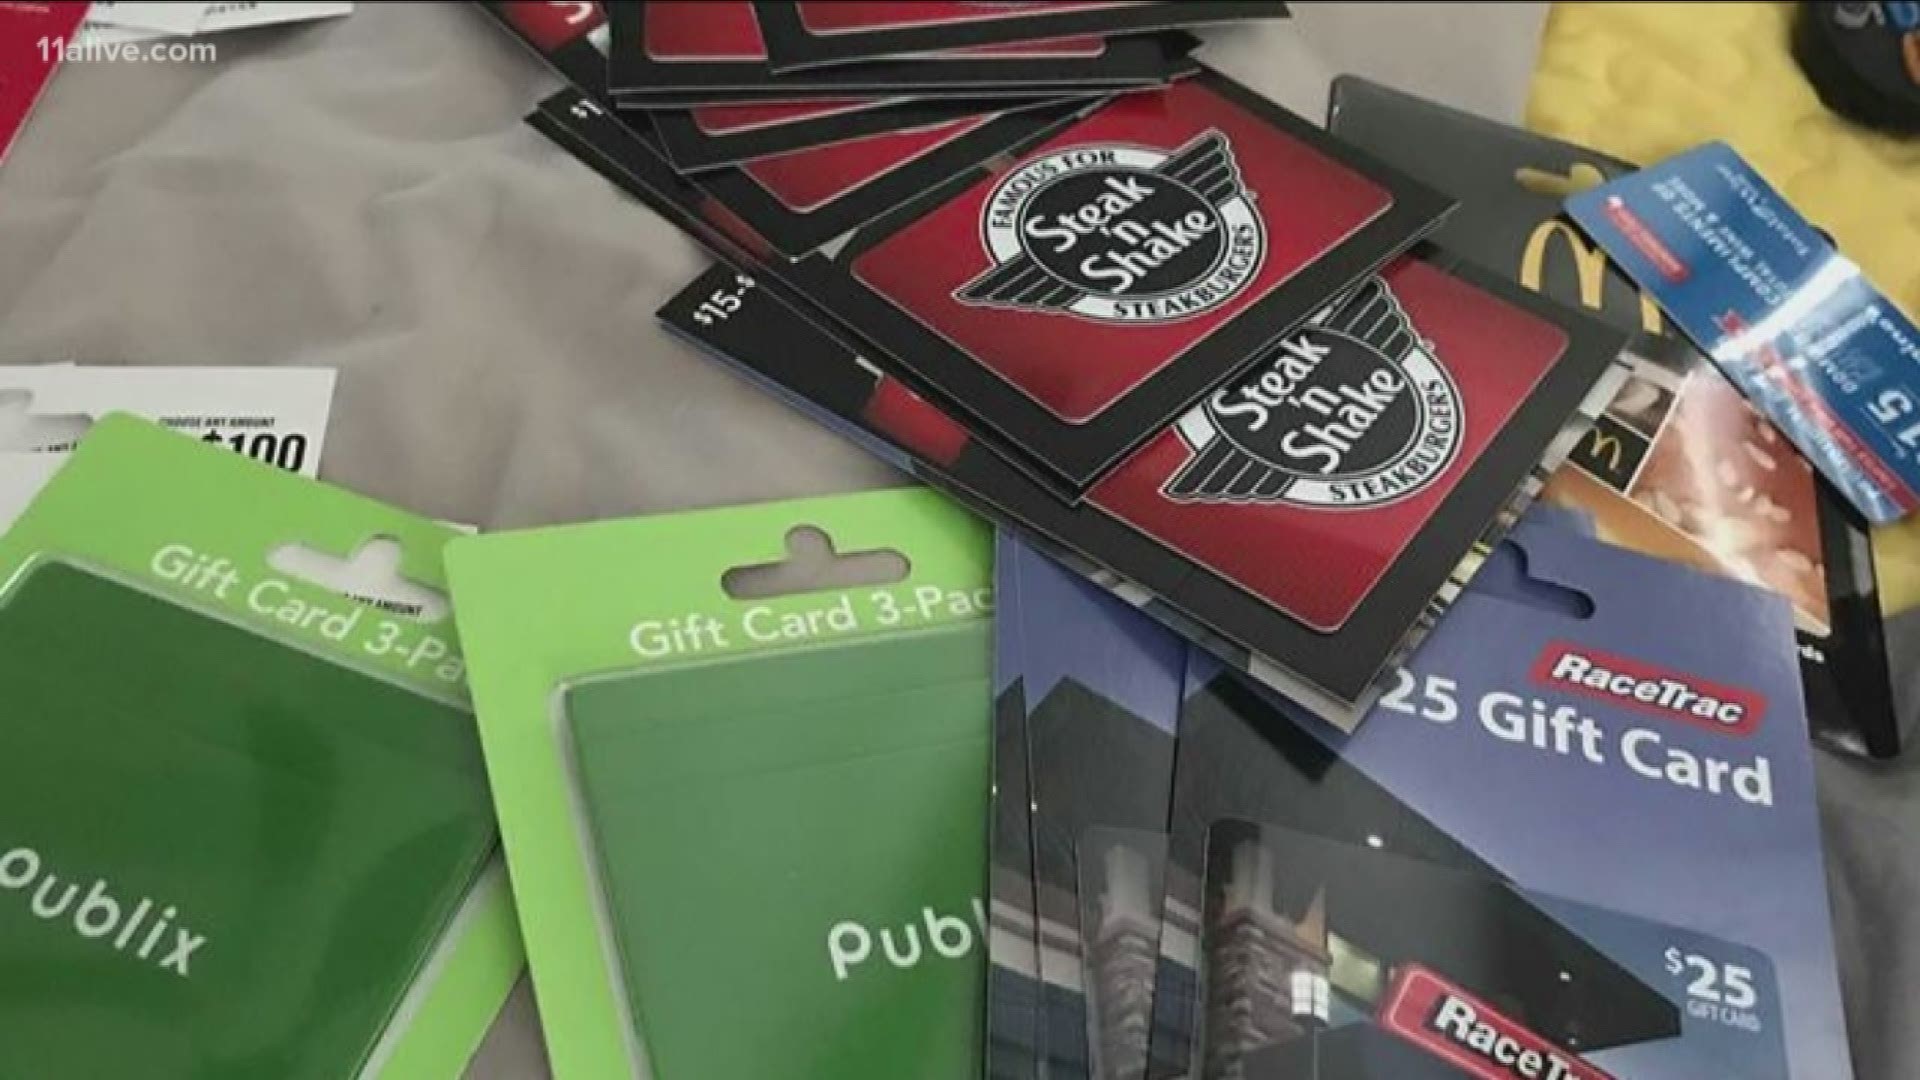 A new foundation in Cobb County aims to support police officers out on patrol. They've donated thousands of dollars in gift cards, so officers can give them to people in need.